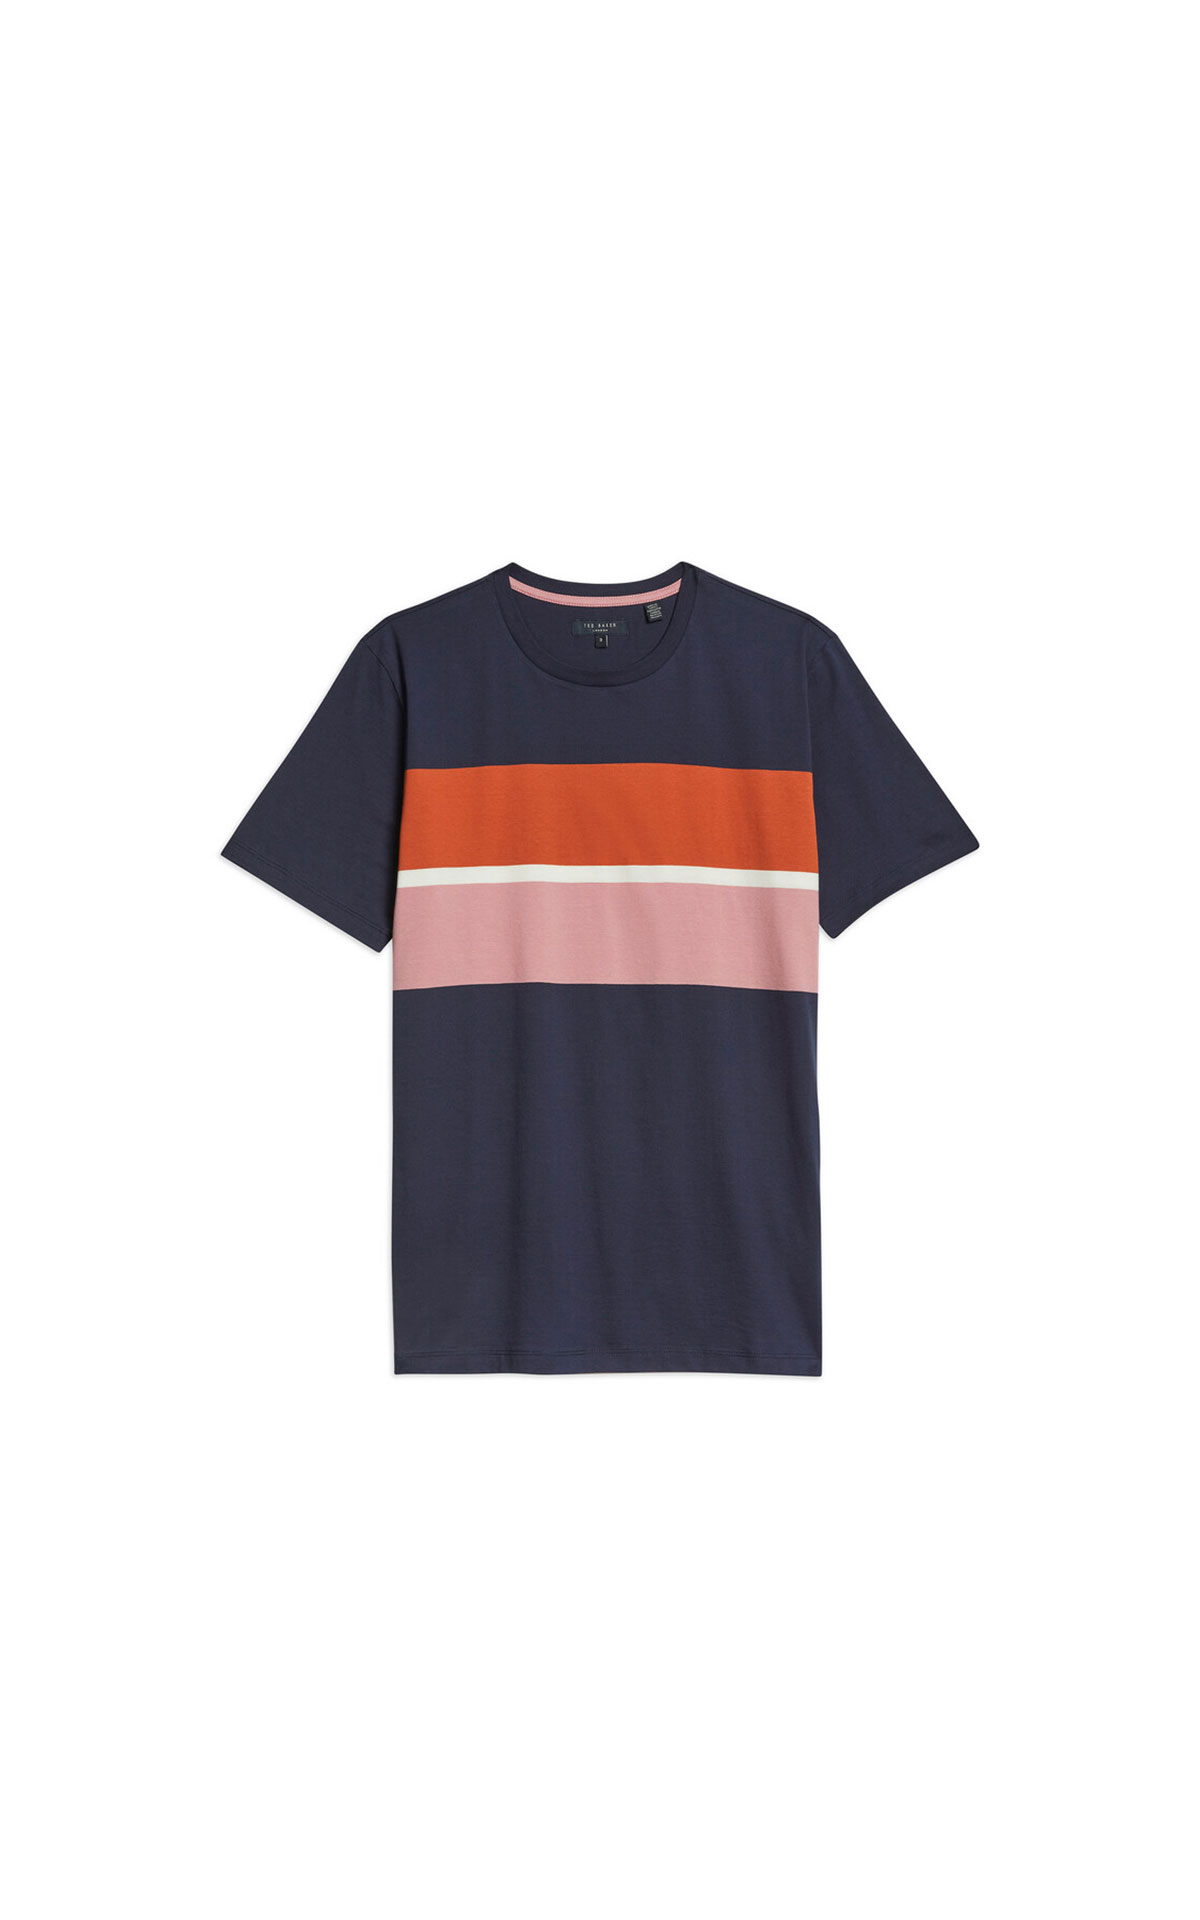 Ted Baker SS chest stripe t-shirt from Bicester Village